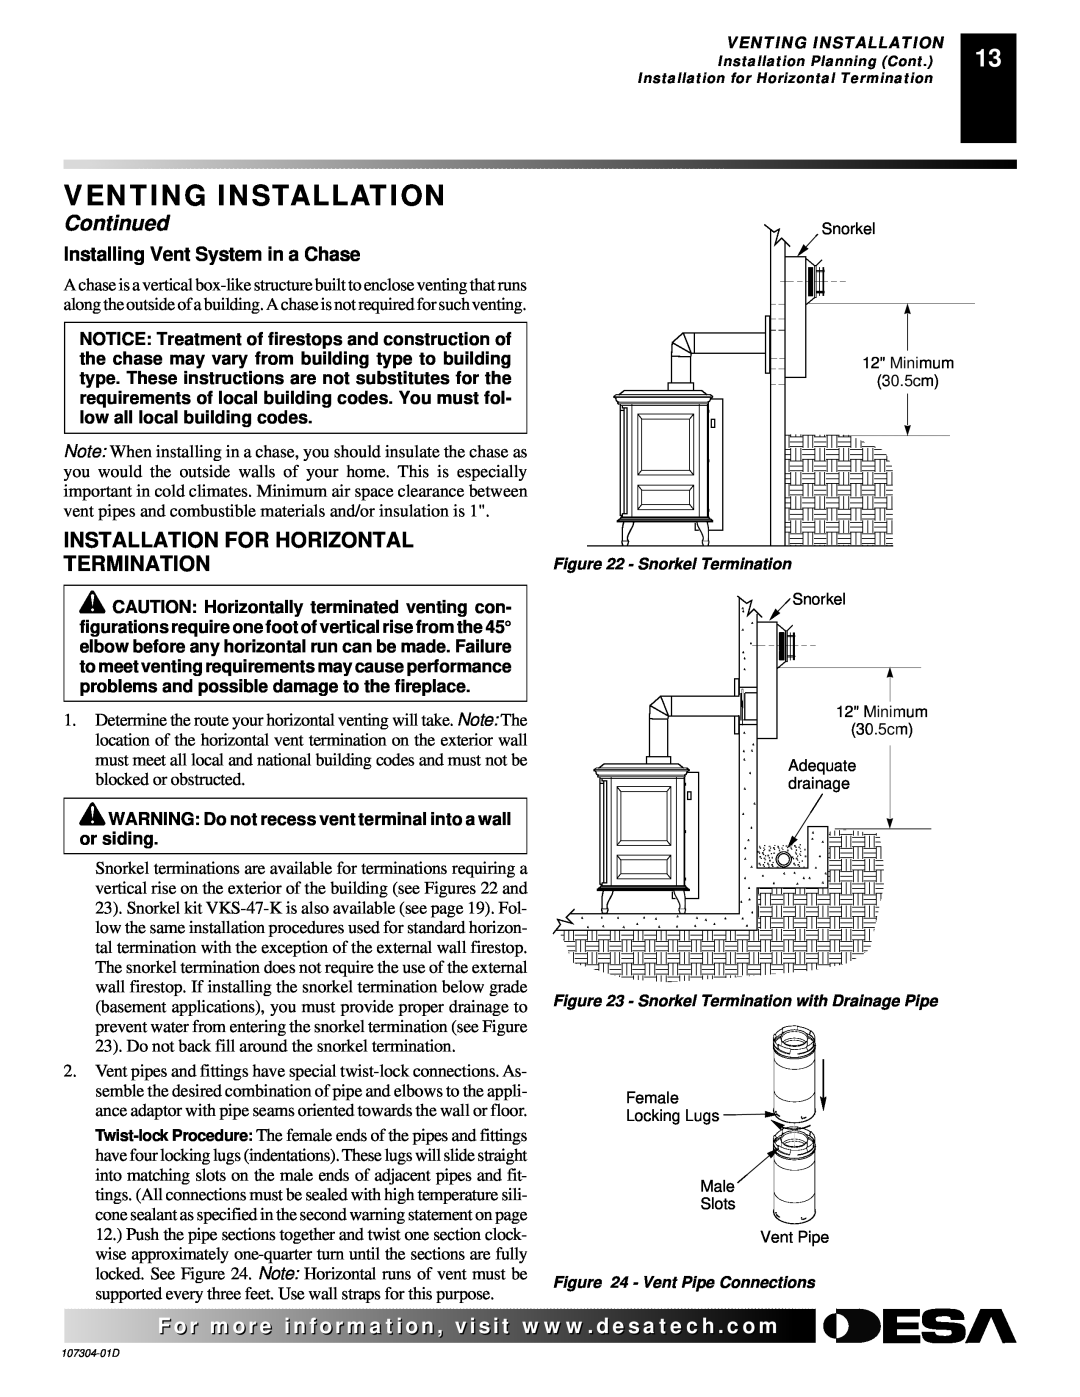 Desa SDVBNC Installation For Horizontal Termination, Venting Installation, Continued, Installing Vent System in a Chase 